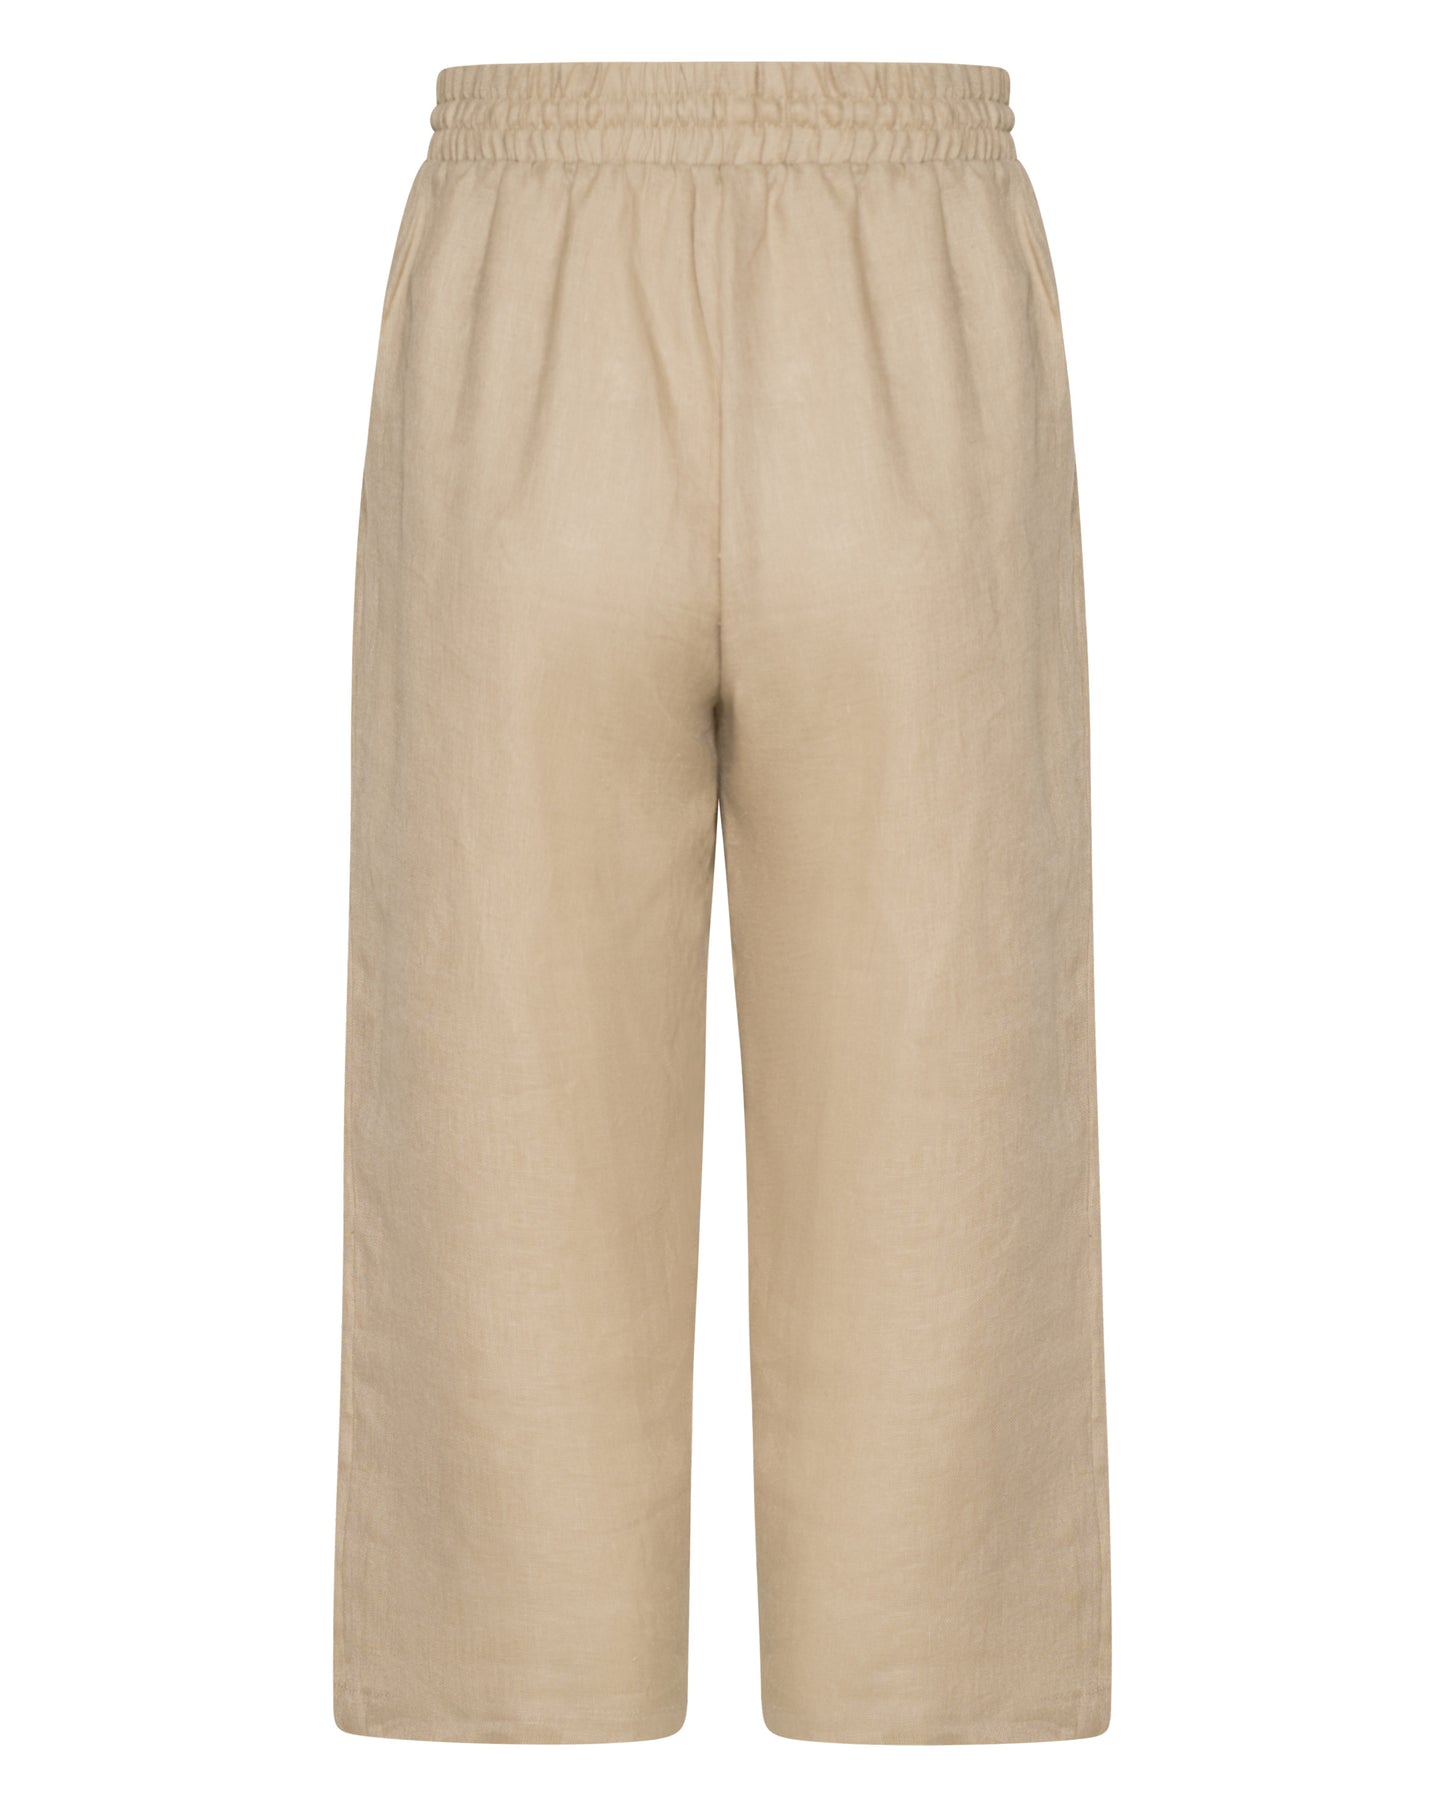 The back of a pair of beige linen pants.